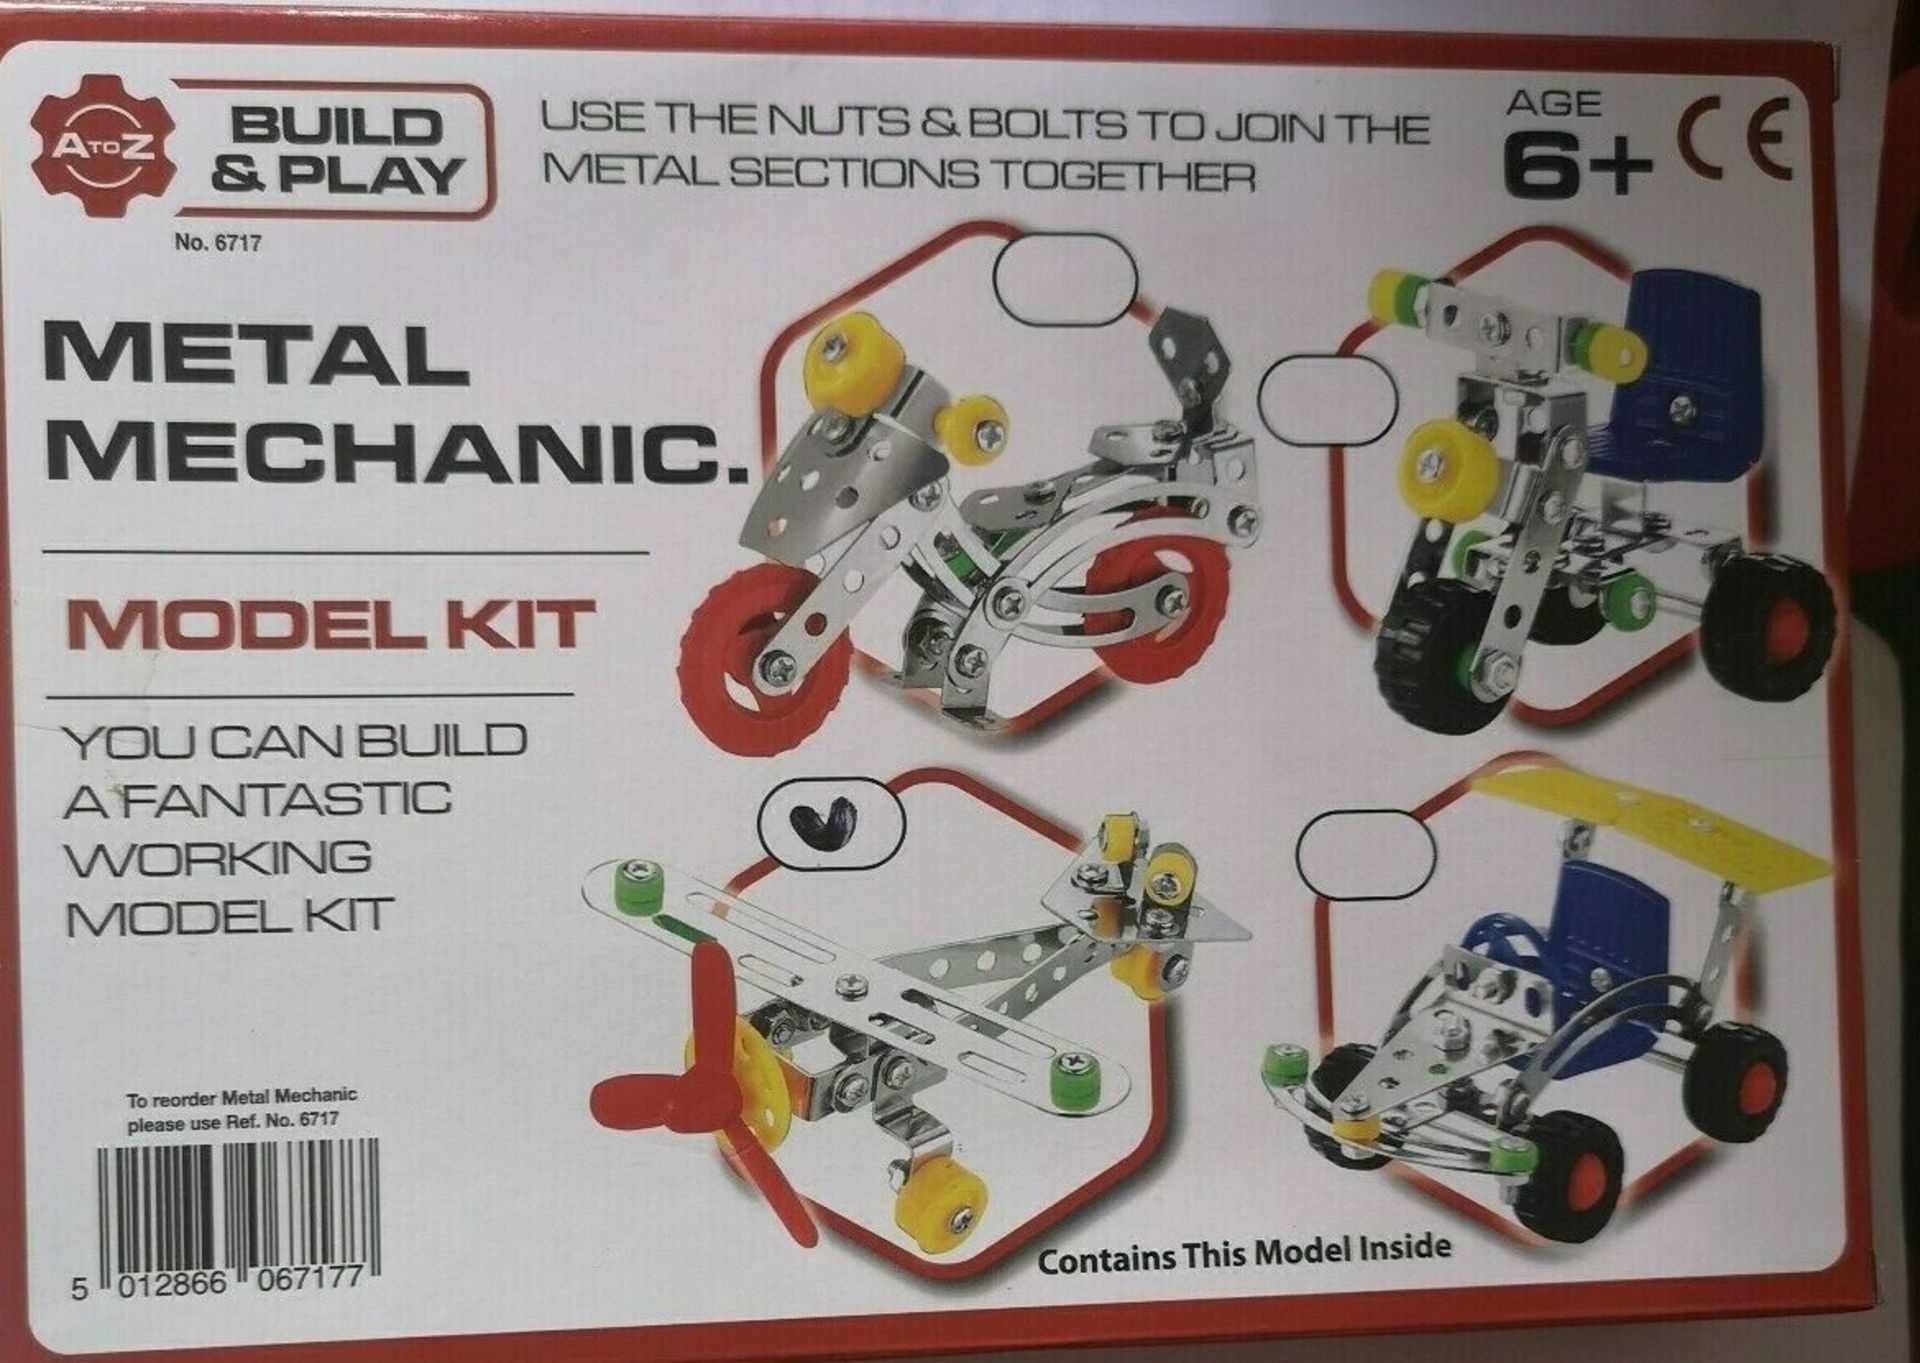 3 x A to Z Build and Play Metal Mechanic model kit No.6717 - Image 2 of 2